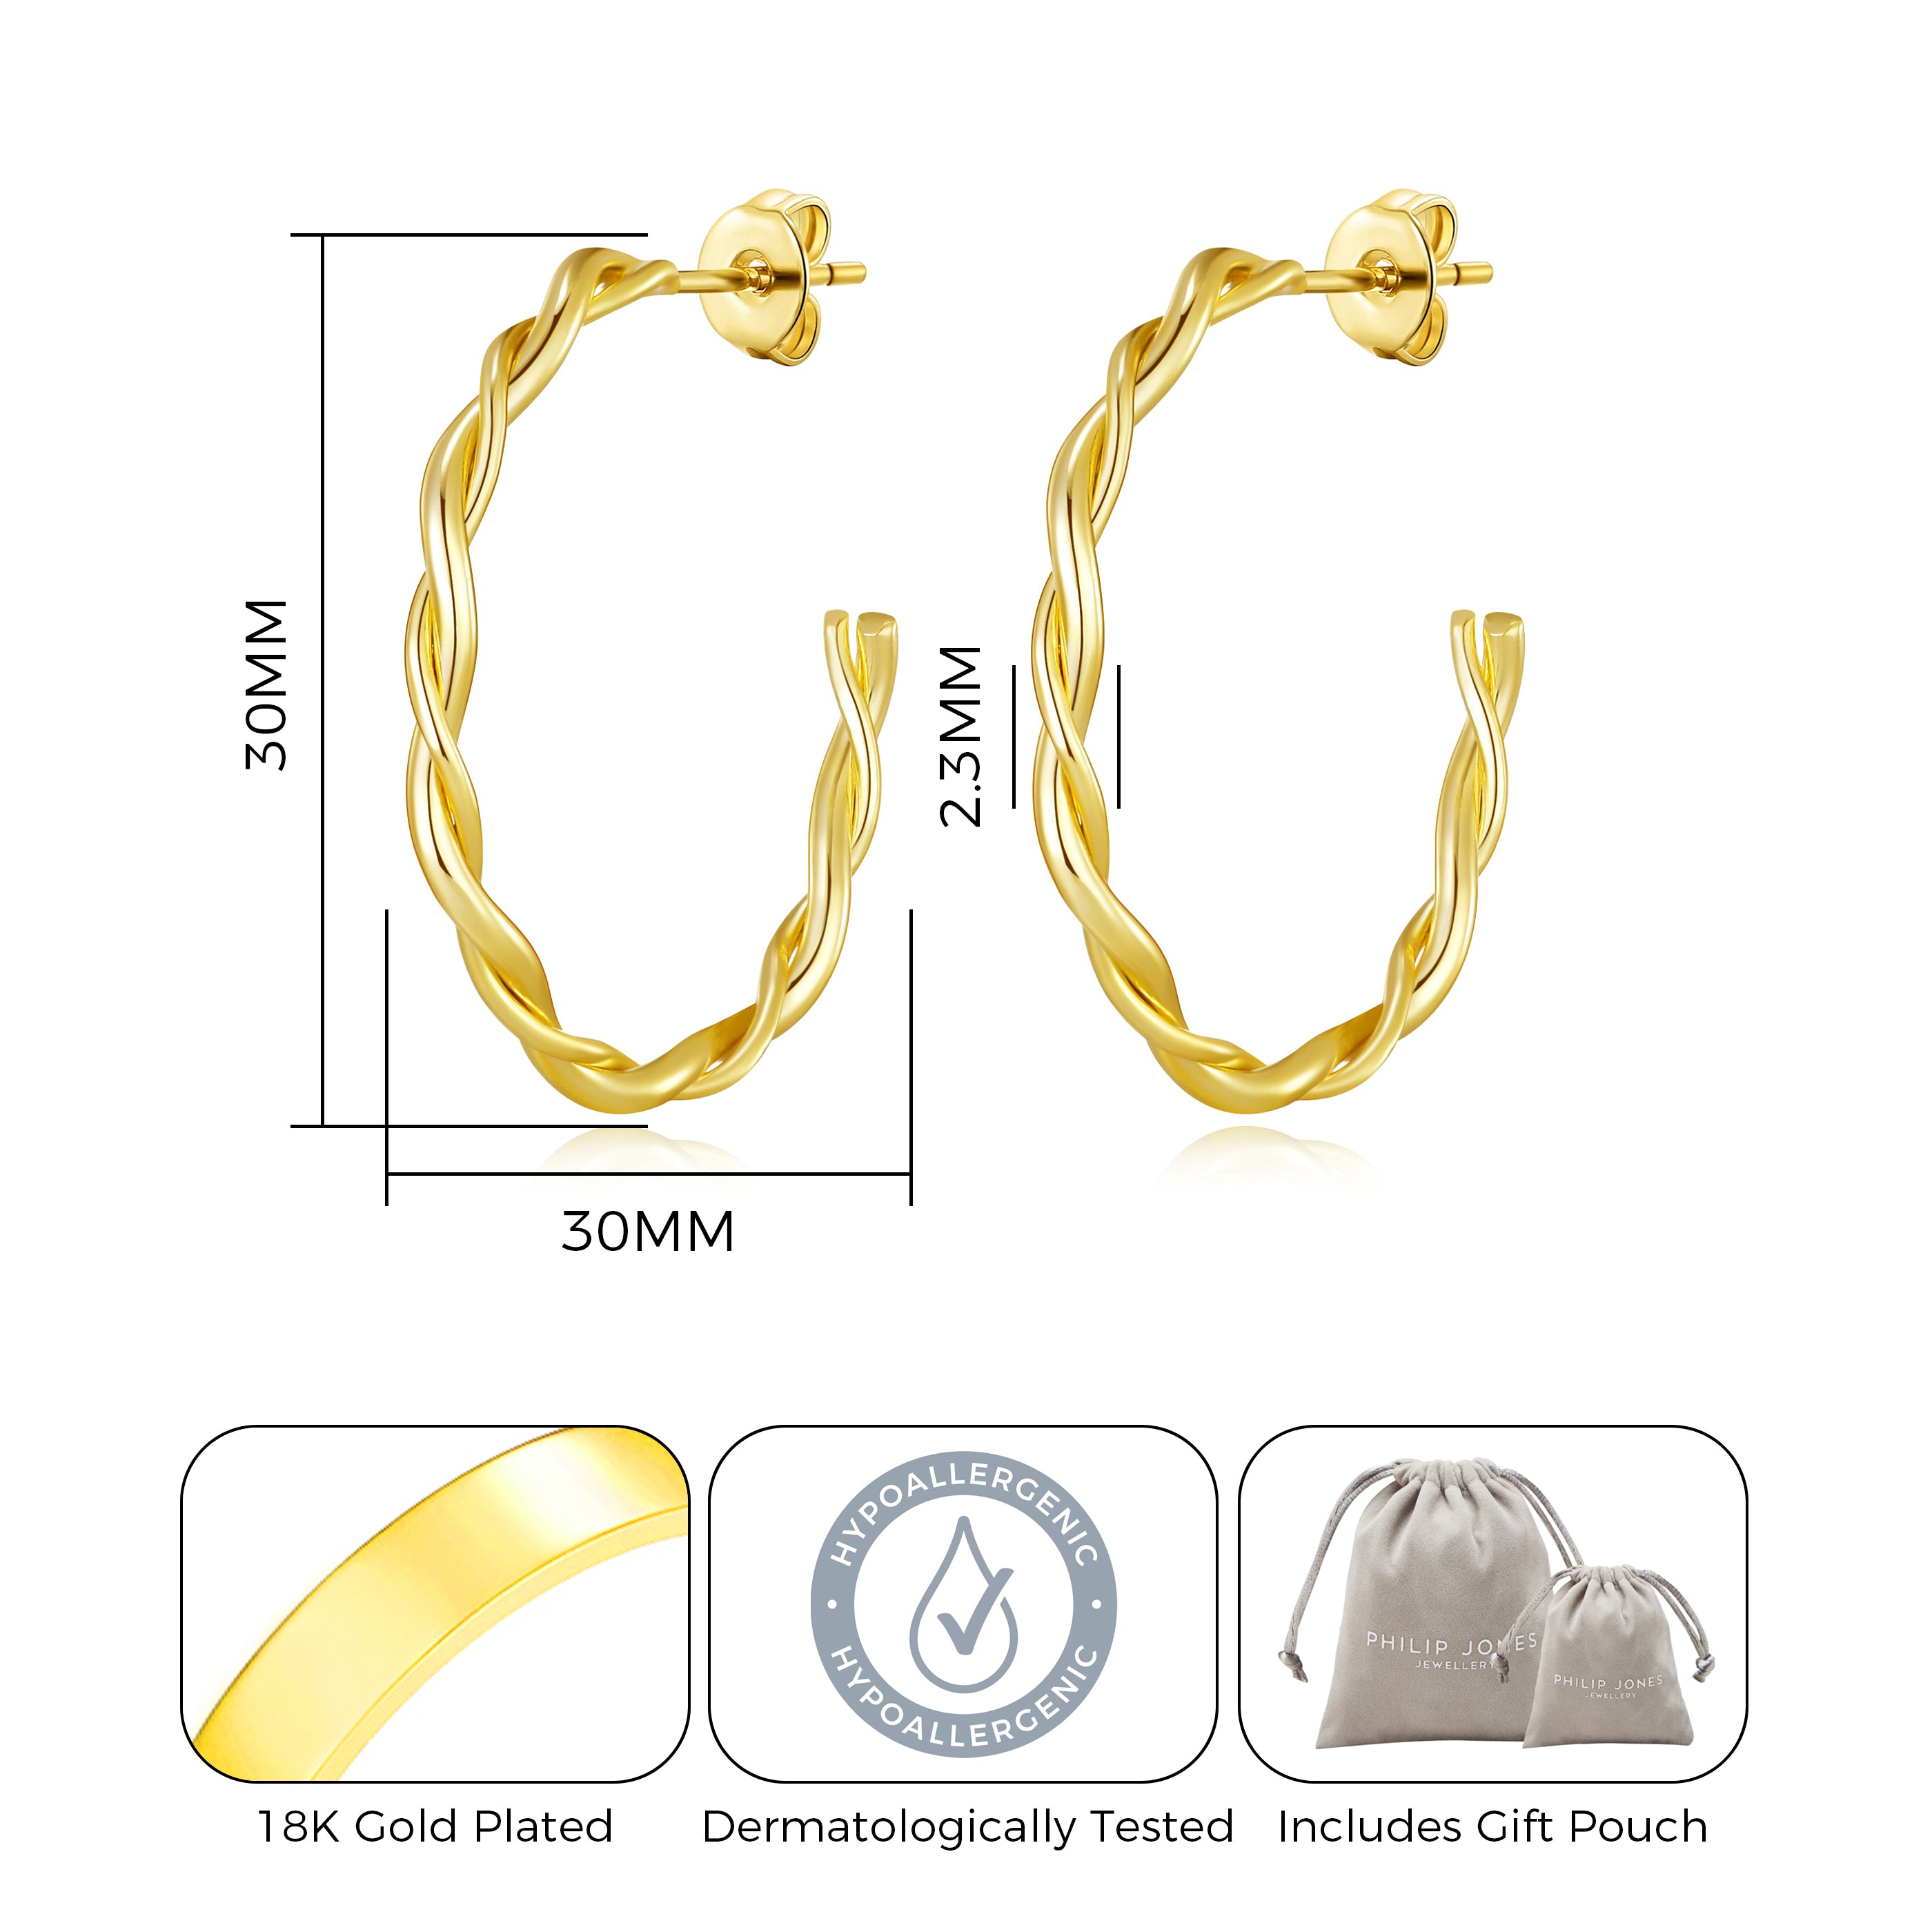 Gold Plated 30mm Twisted Hoop Earrings